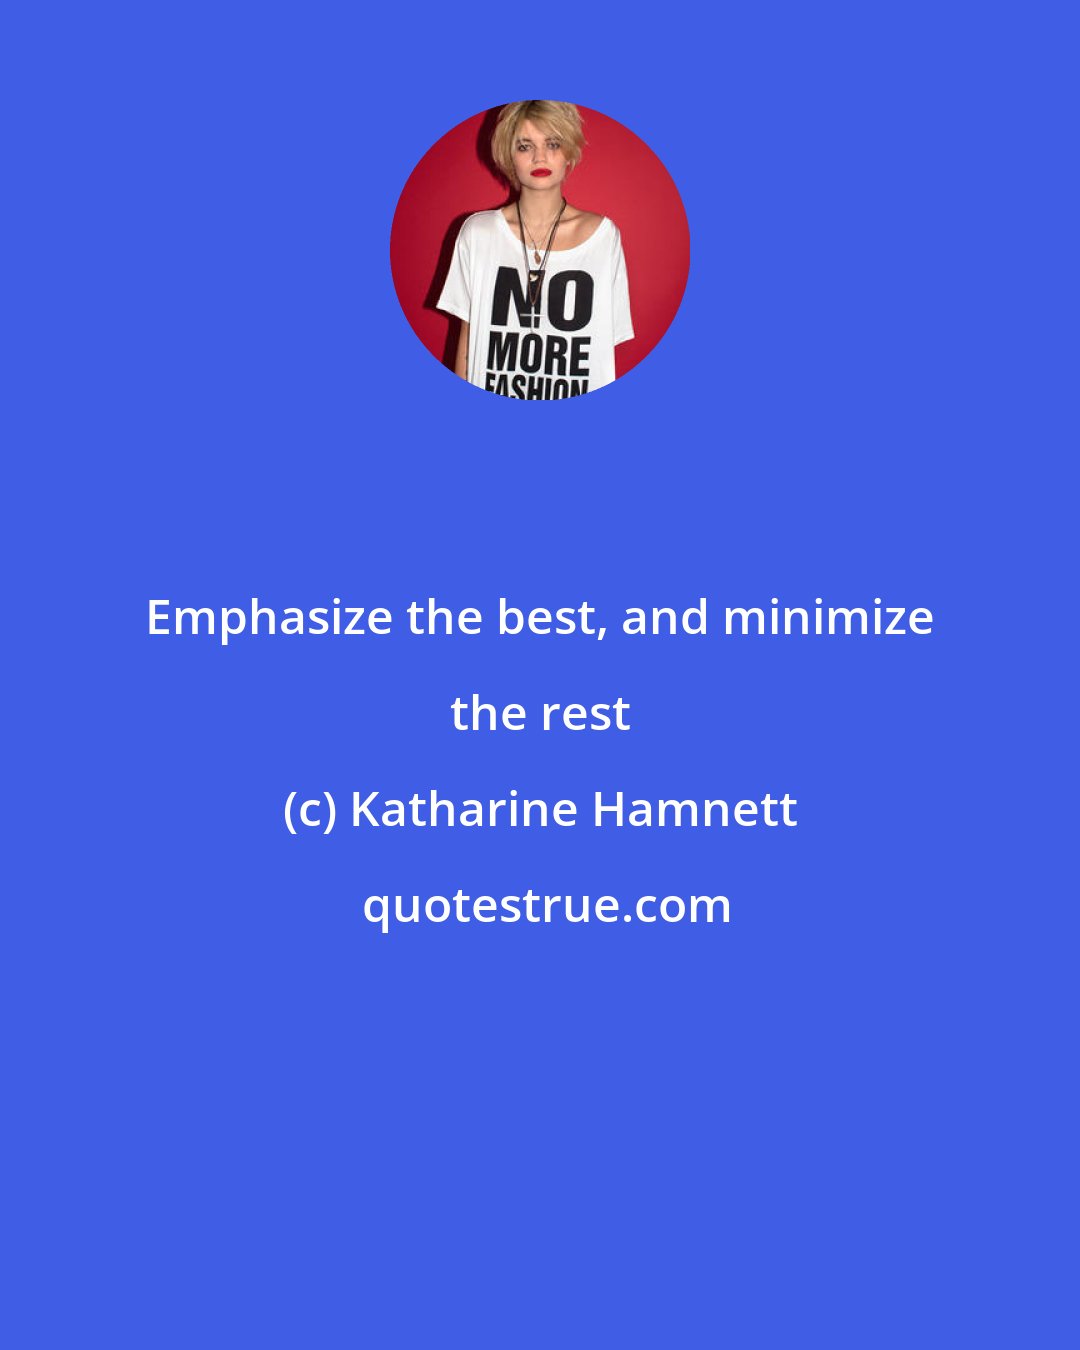 Katharine Hamnett: Emphasize the best, and minimize the rest